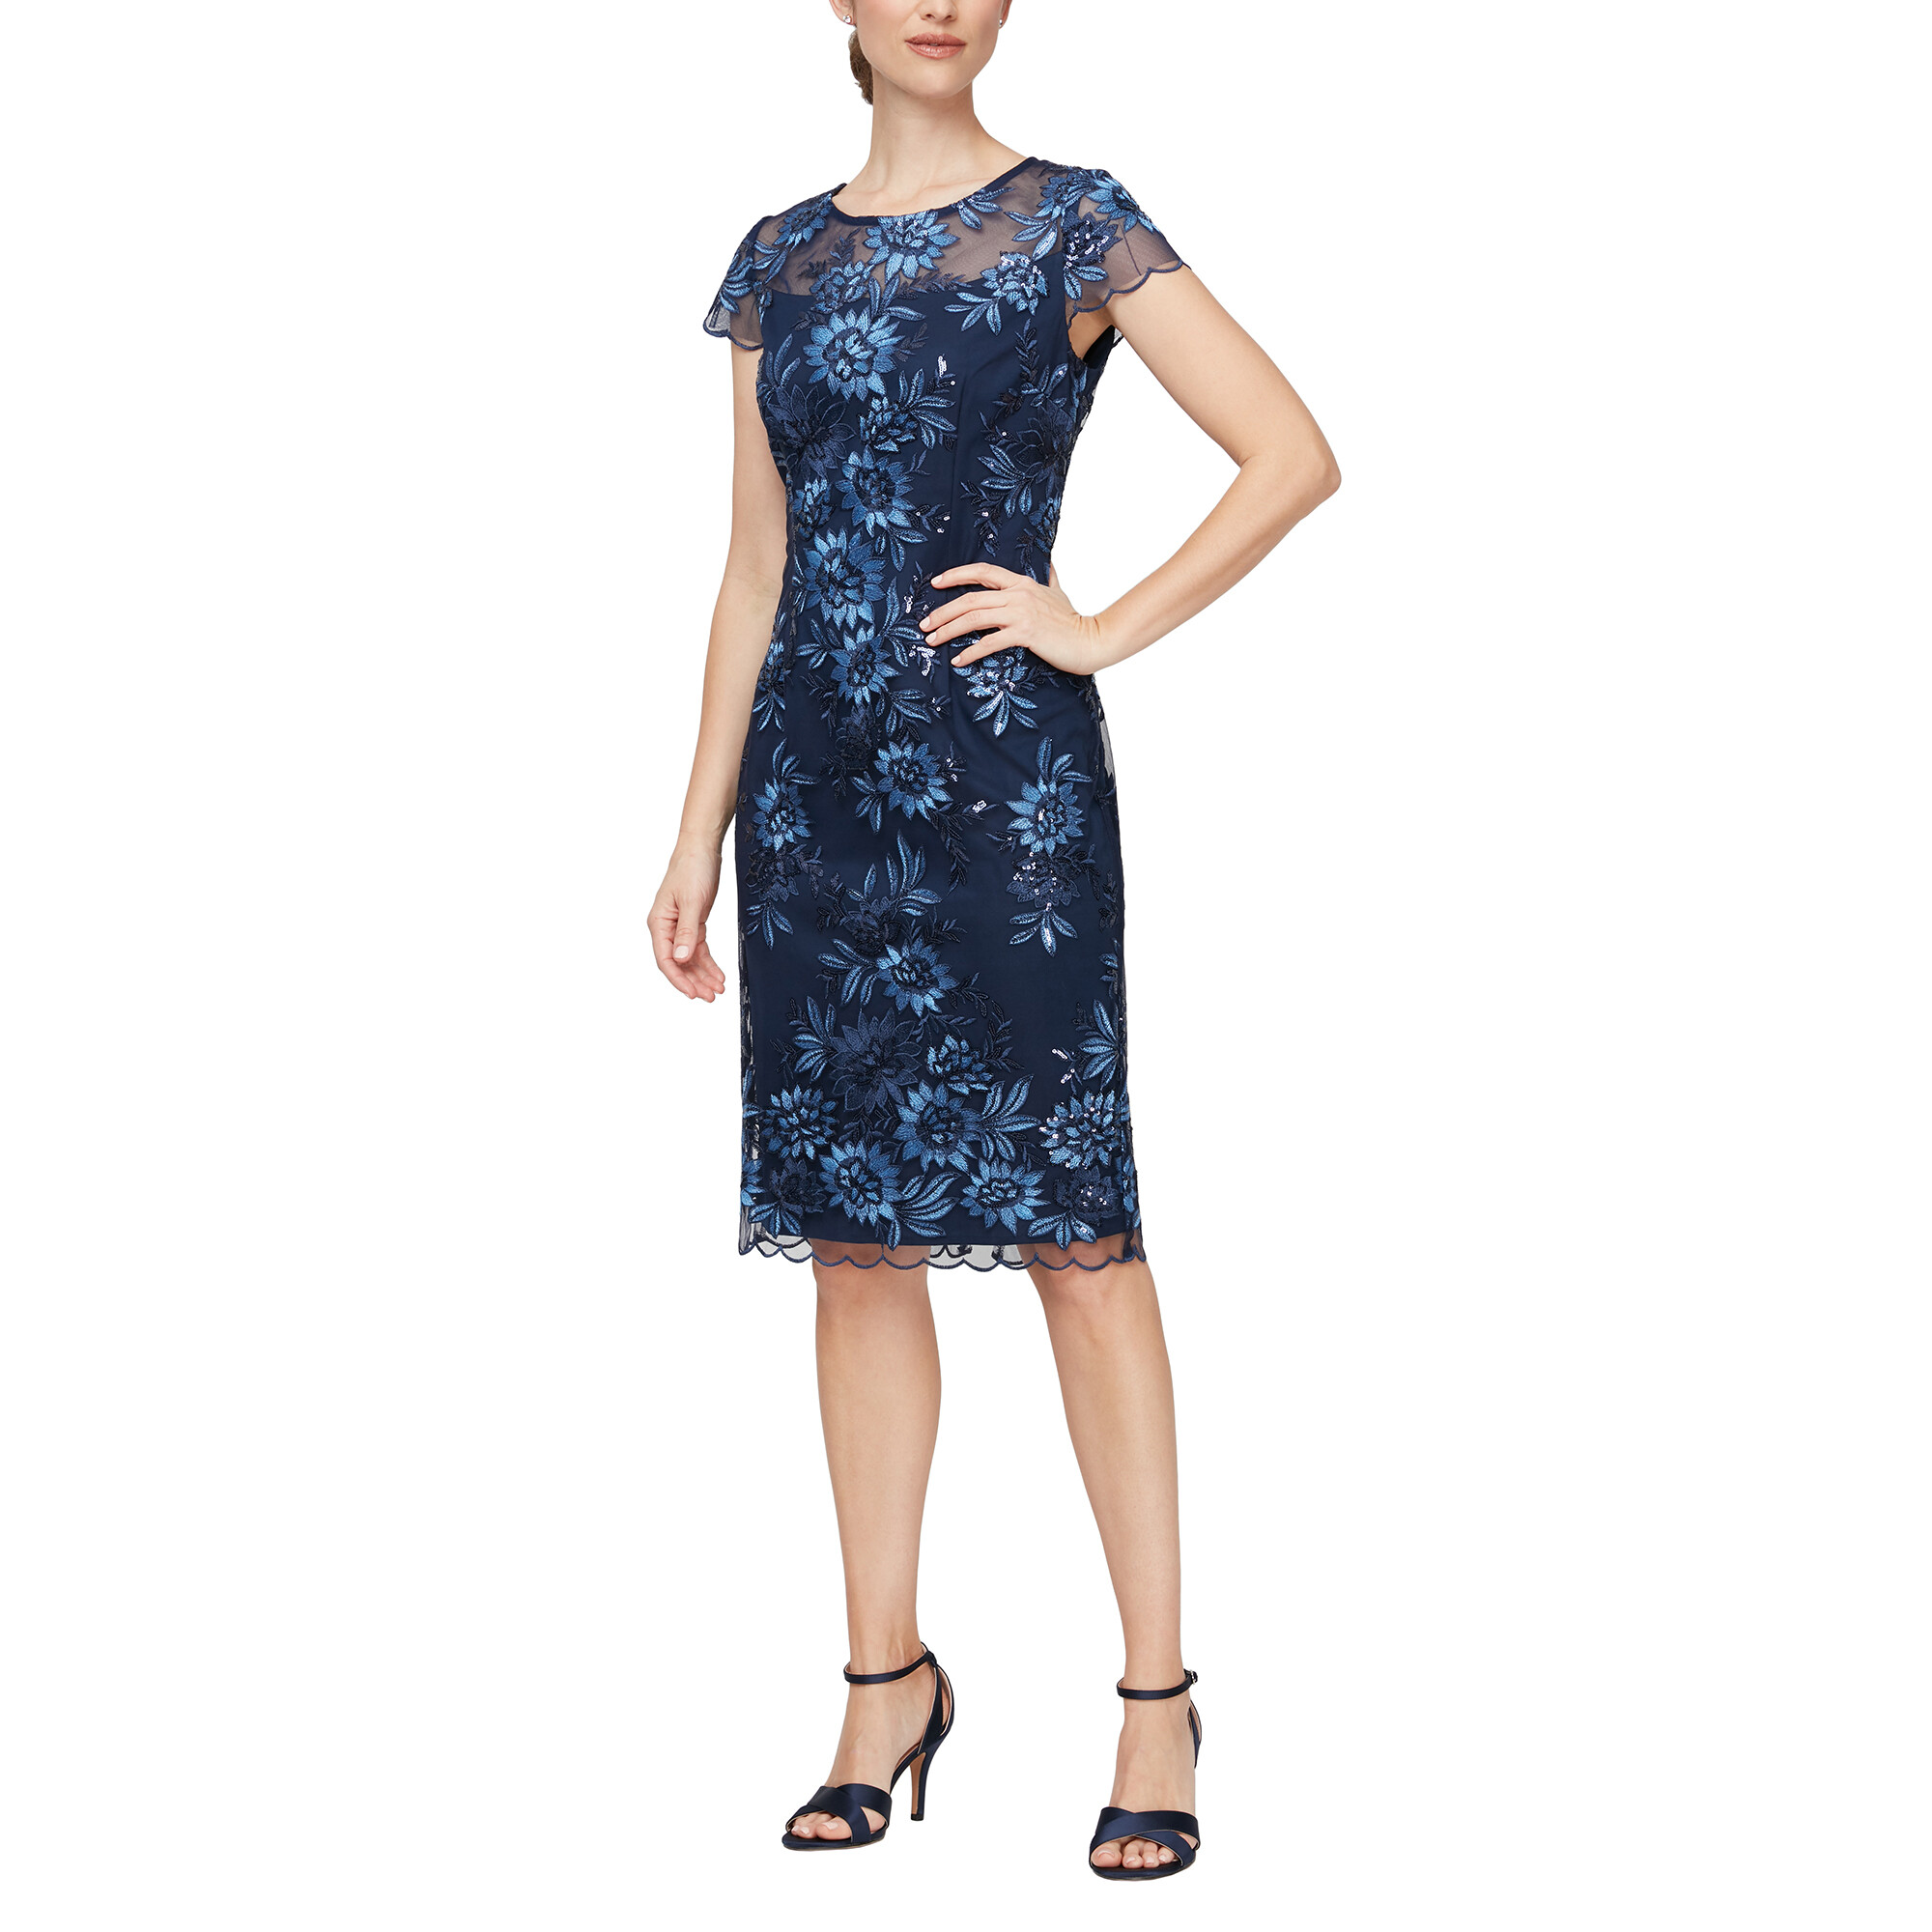 Imbracaminte Femei Alex Evenings Midi Length Embroidered Cap Sleeve Dress with Illusion Neckline and Scallop Detail Hem Navy